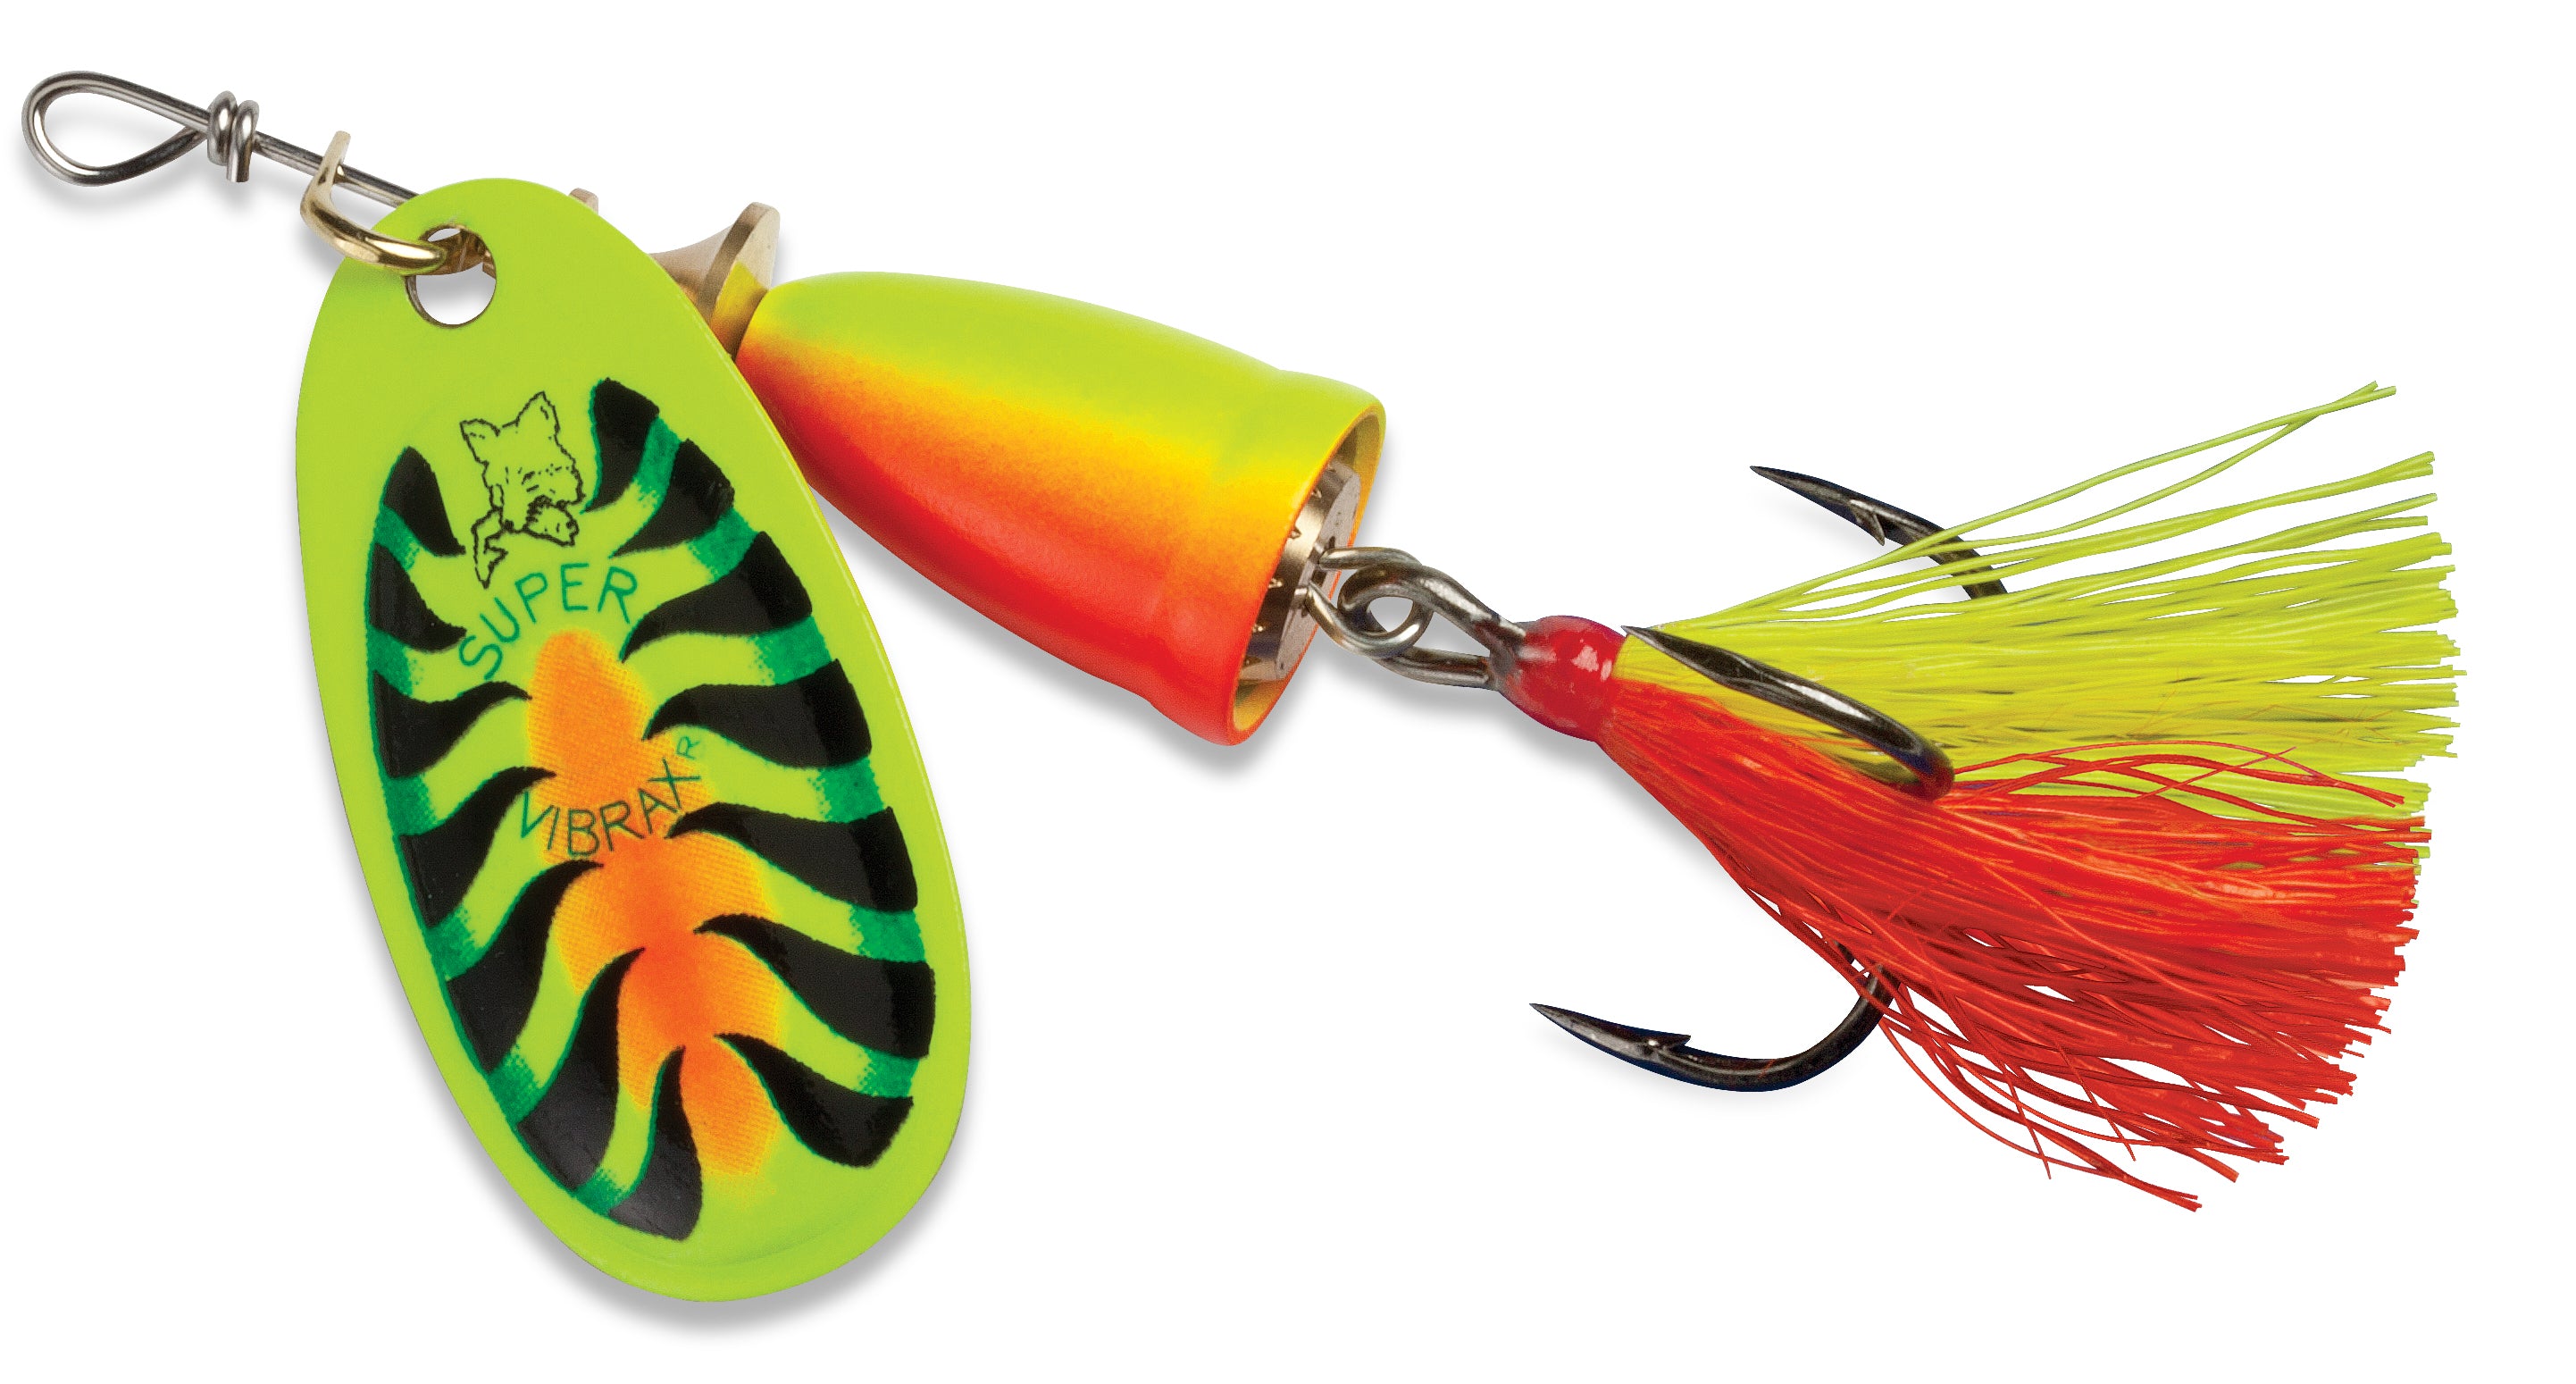  Blue Fox Classic Vibrax 02 Glow 3/16 Oz Fishing lure (Glow  Chartreuse, Size- 2.44) : Fishing Spinners And Spinnerbaits : Sports &  Outdoors